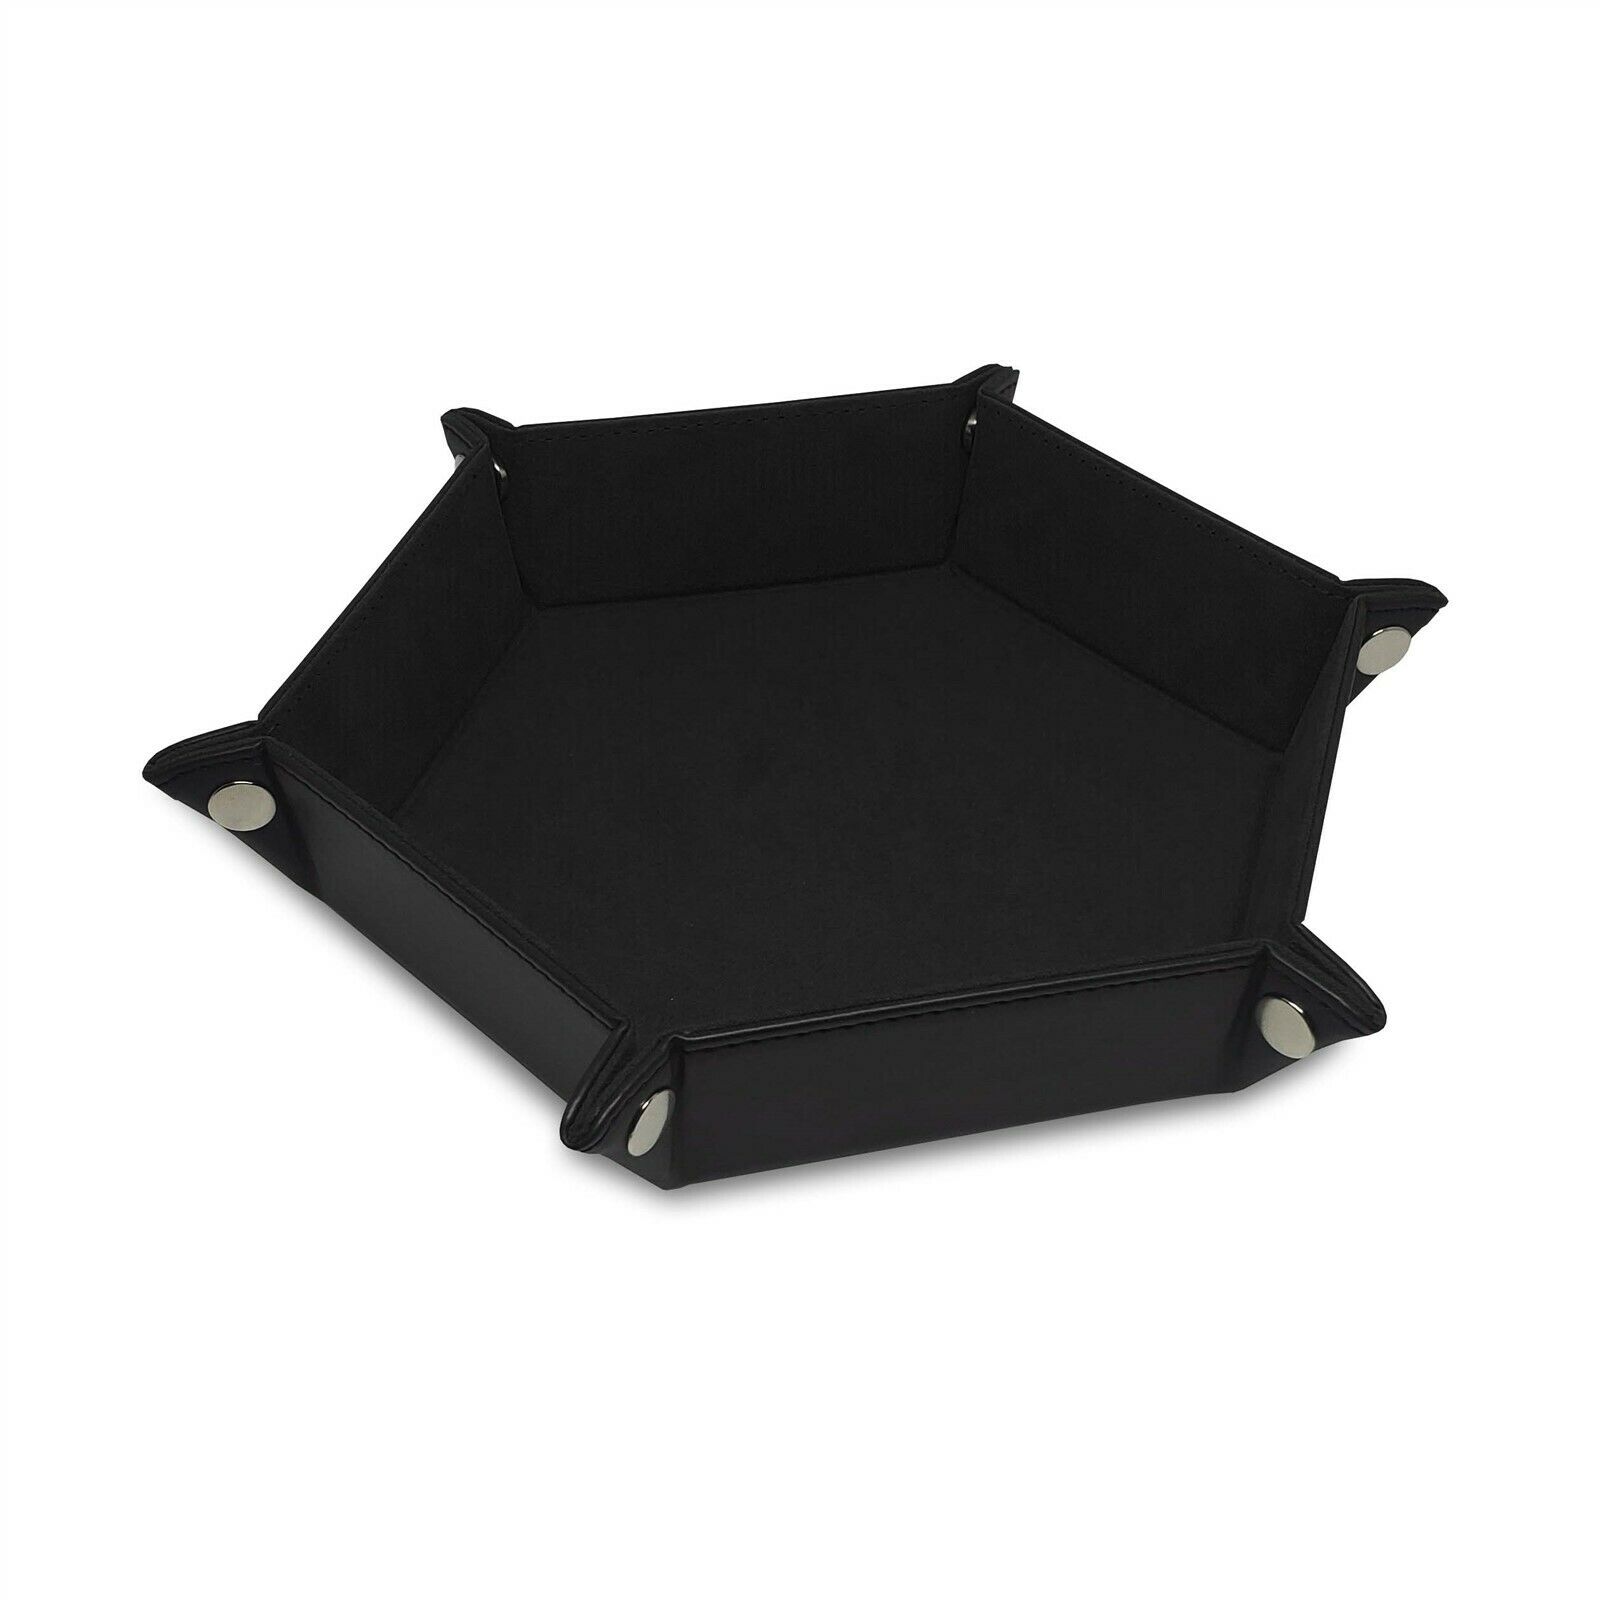 Bcw Folding Hexagon Dice Tray Pu Leather Black Suede Dungeons Dragons Pathfinder